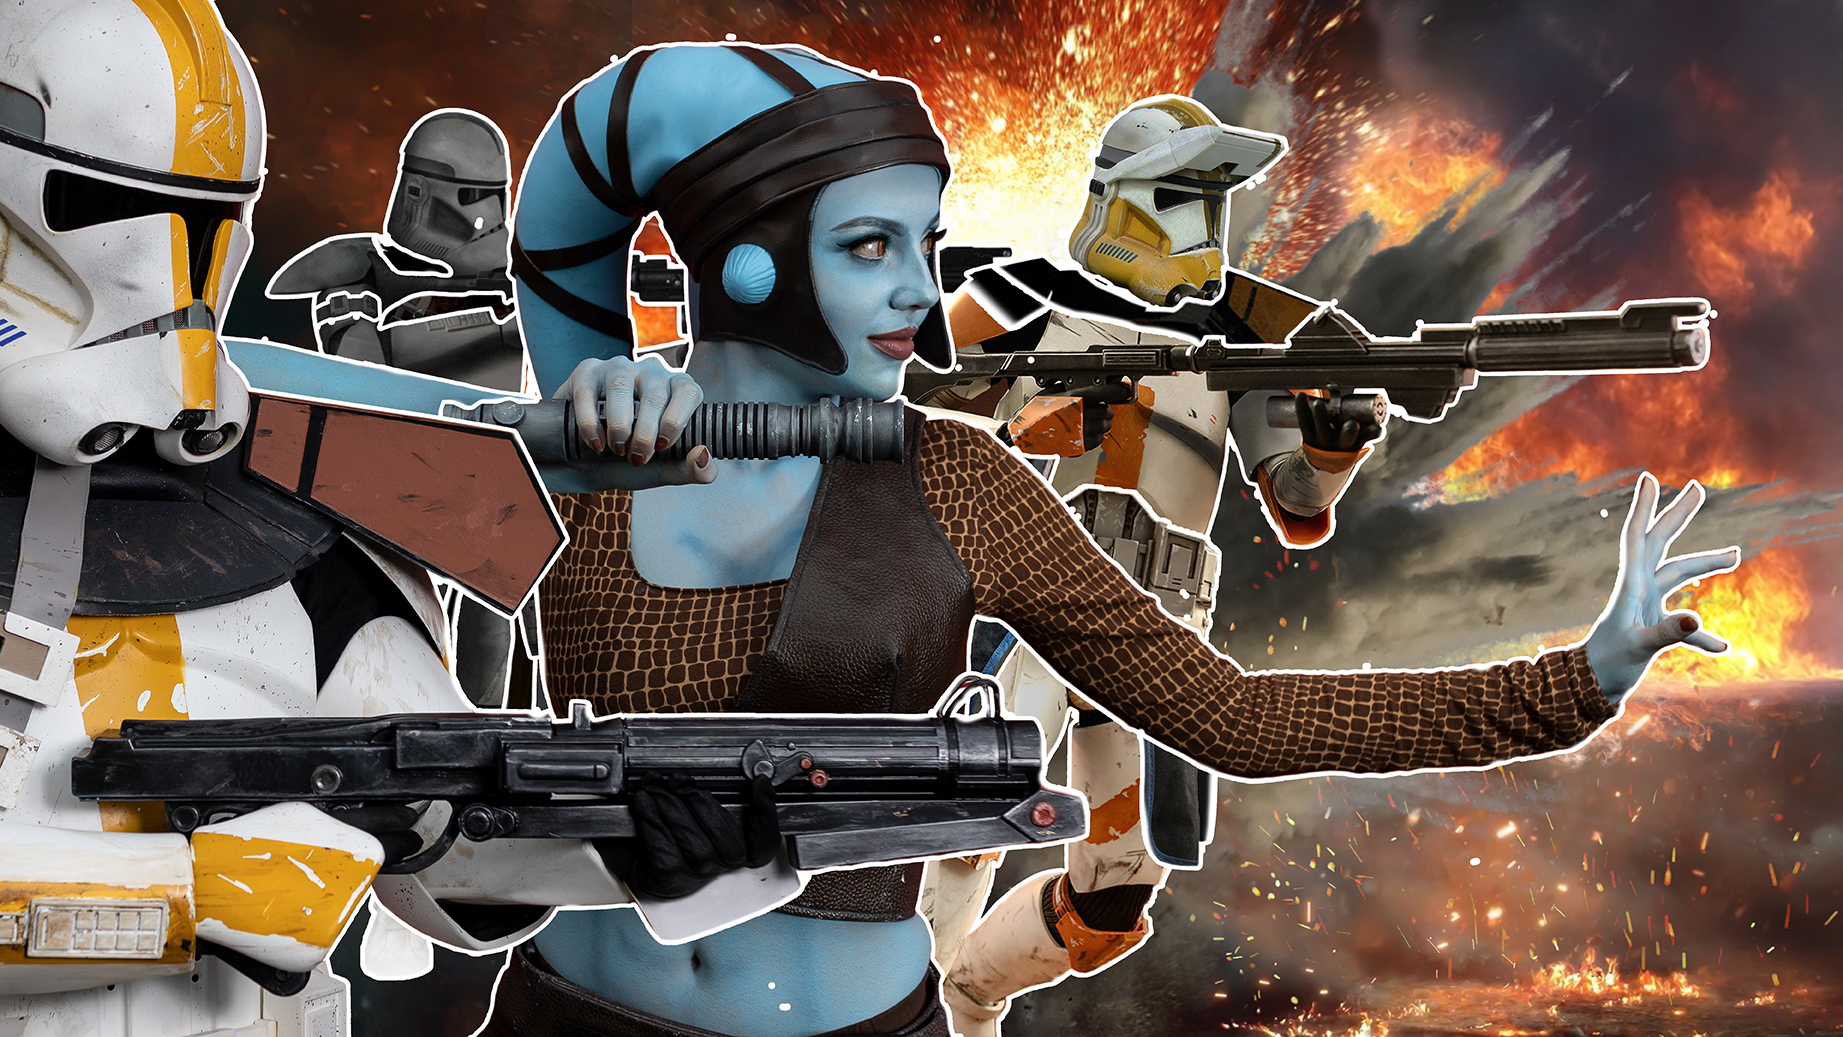 Aayla_Secura_&_the_327th_before